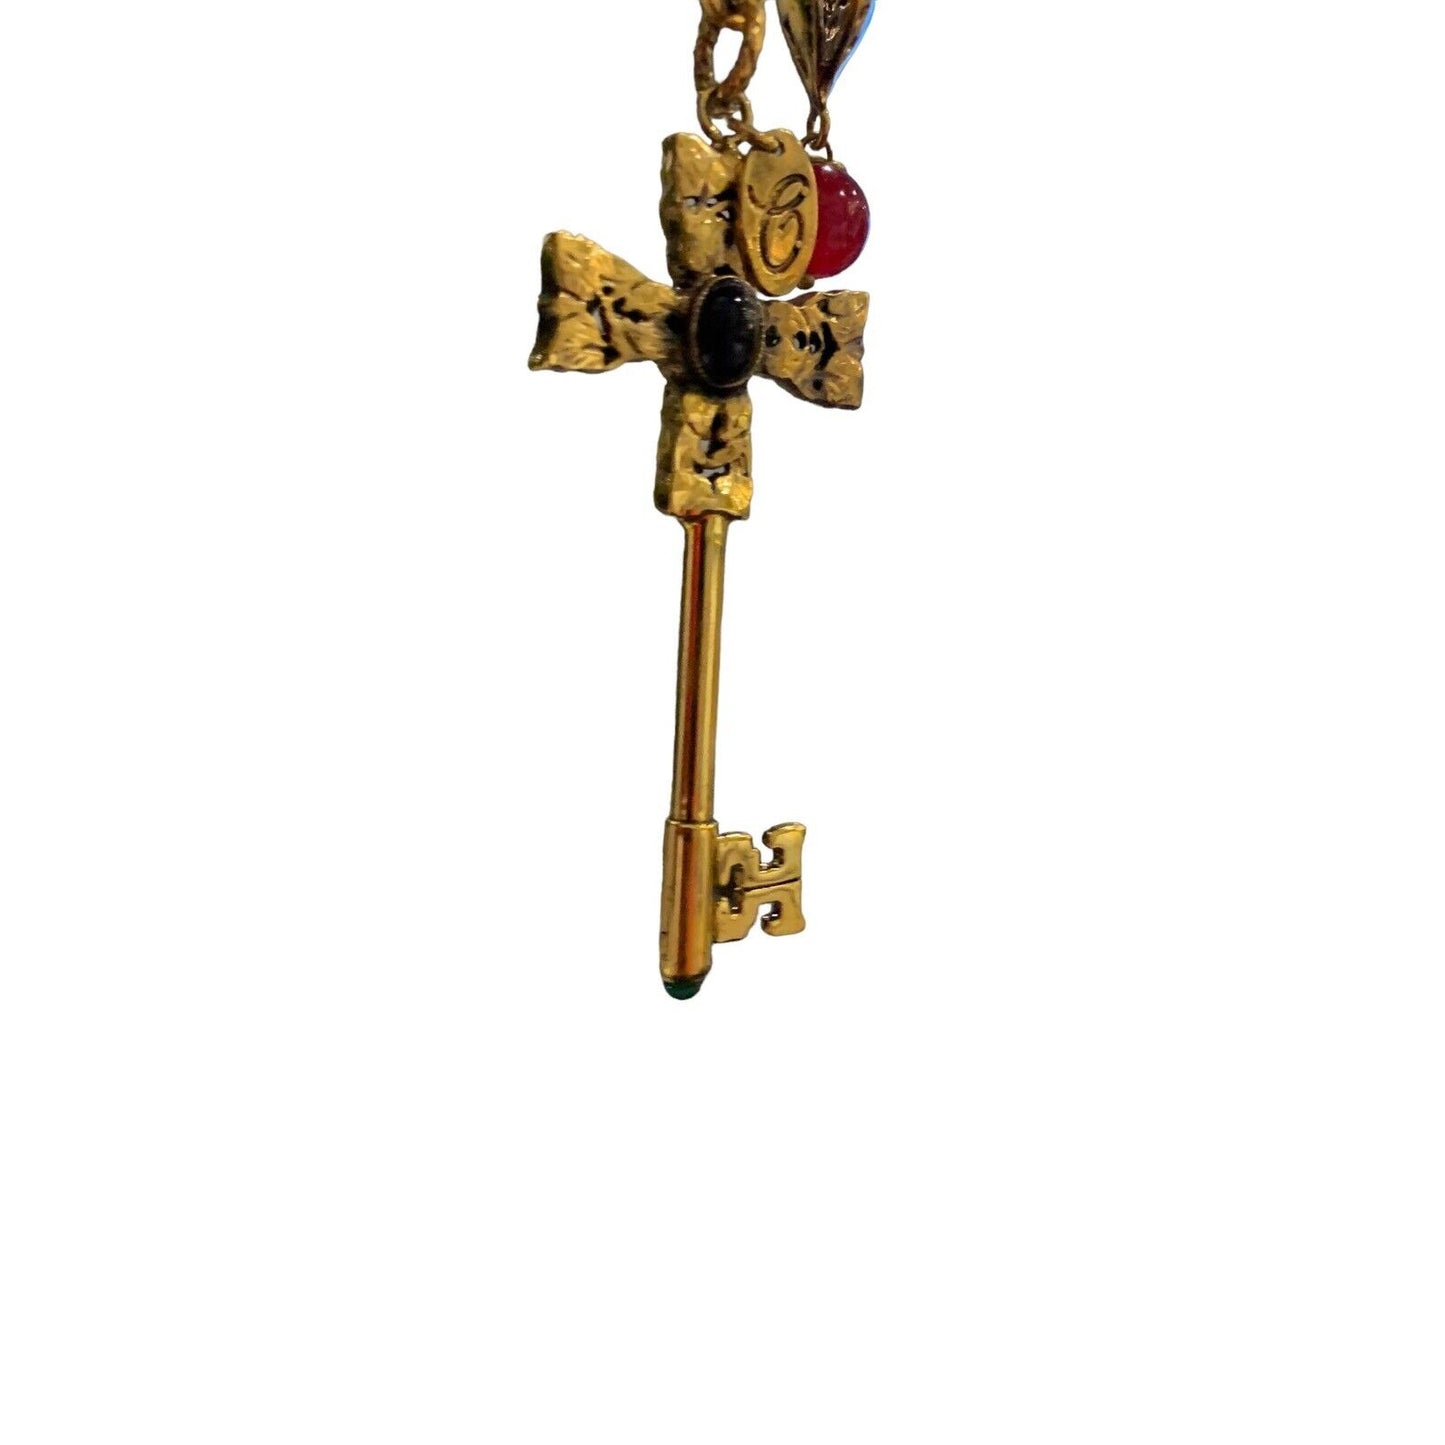 Canipelli Firenze Handbag Charm Renaissance Key with Heart Accent and Stones